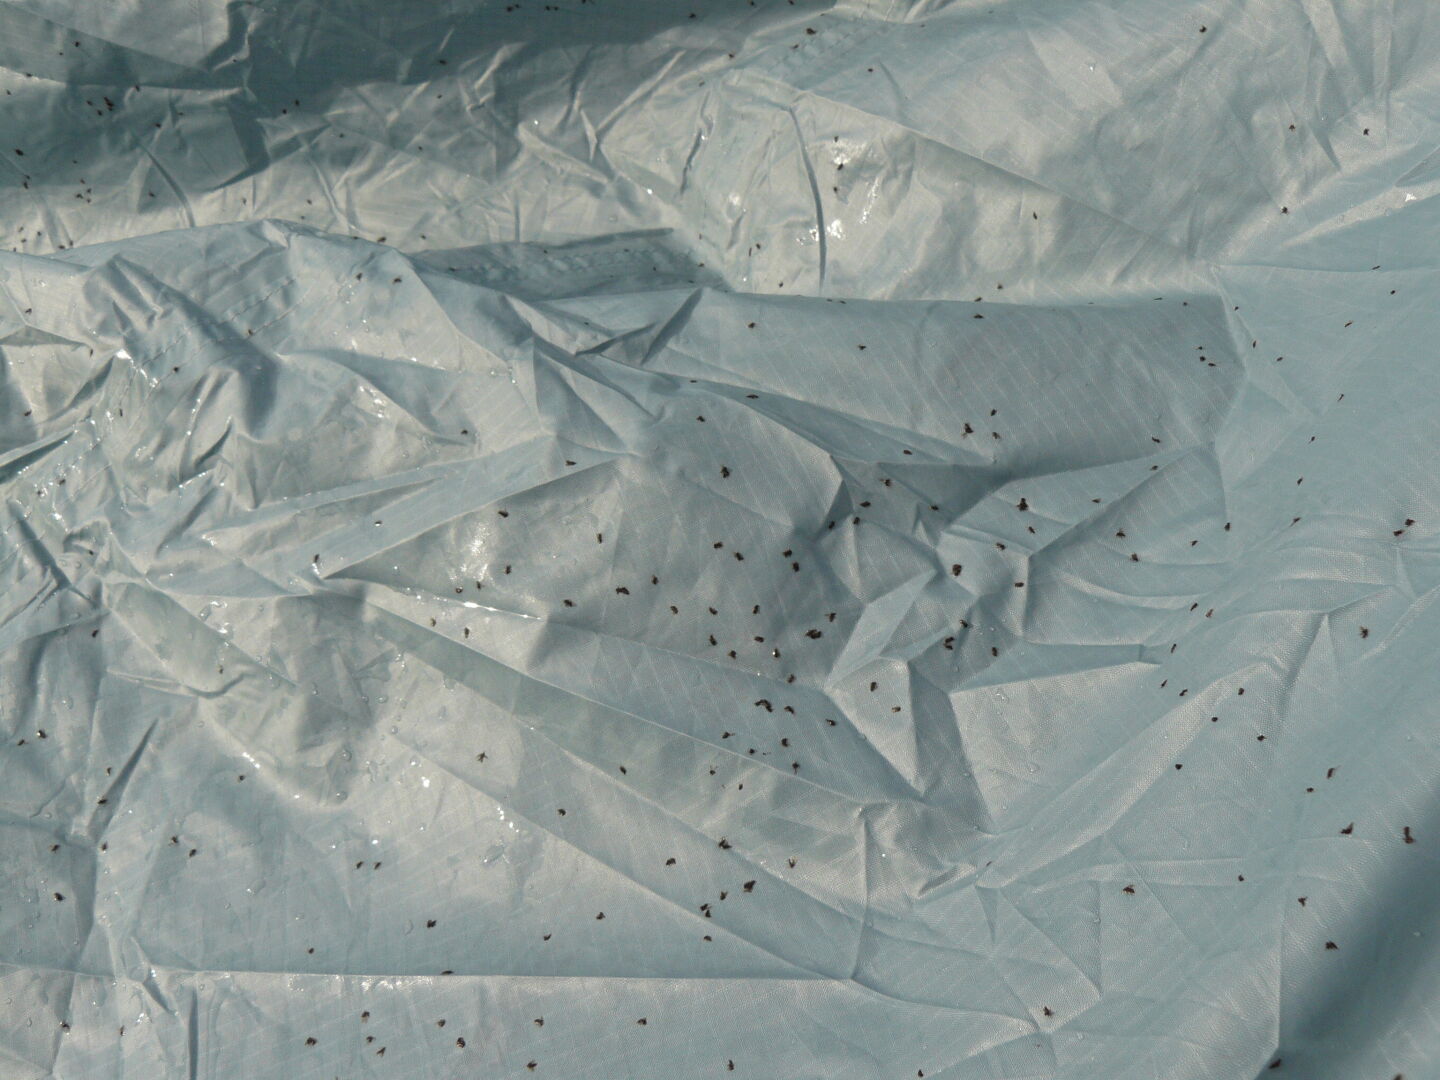 Hundreds of dead midges on the tarpaulin, and millions still buzzing round our heads.